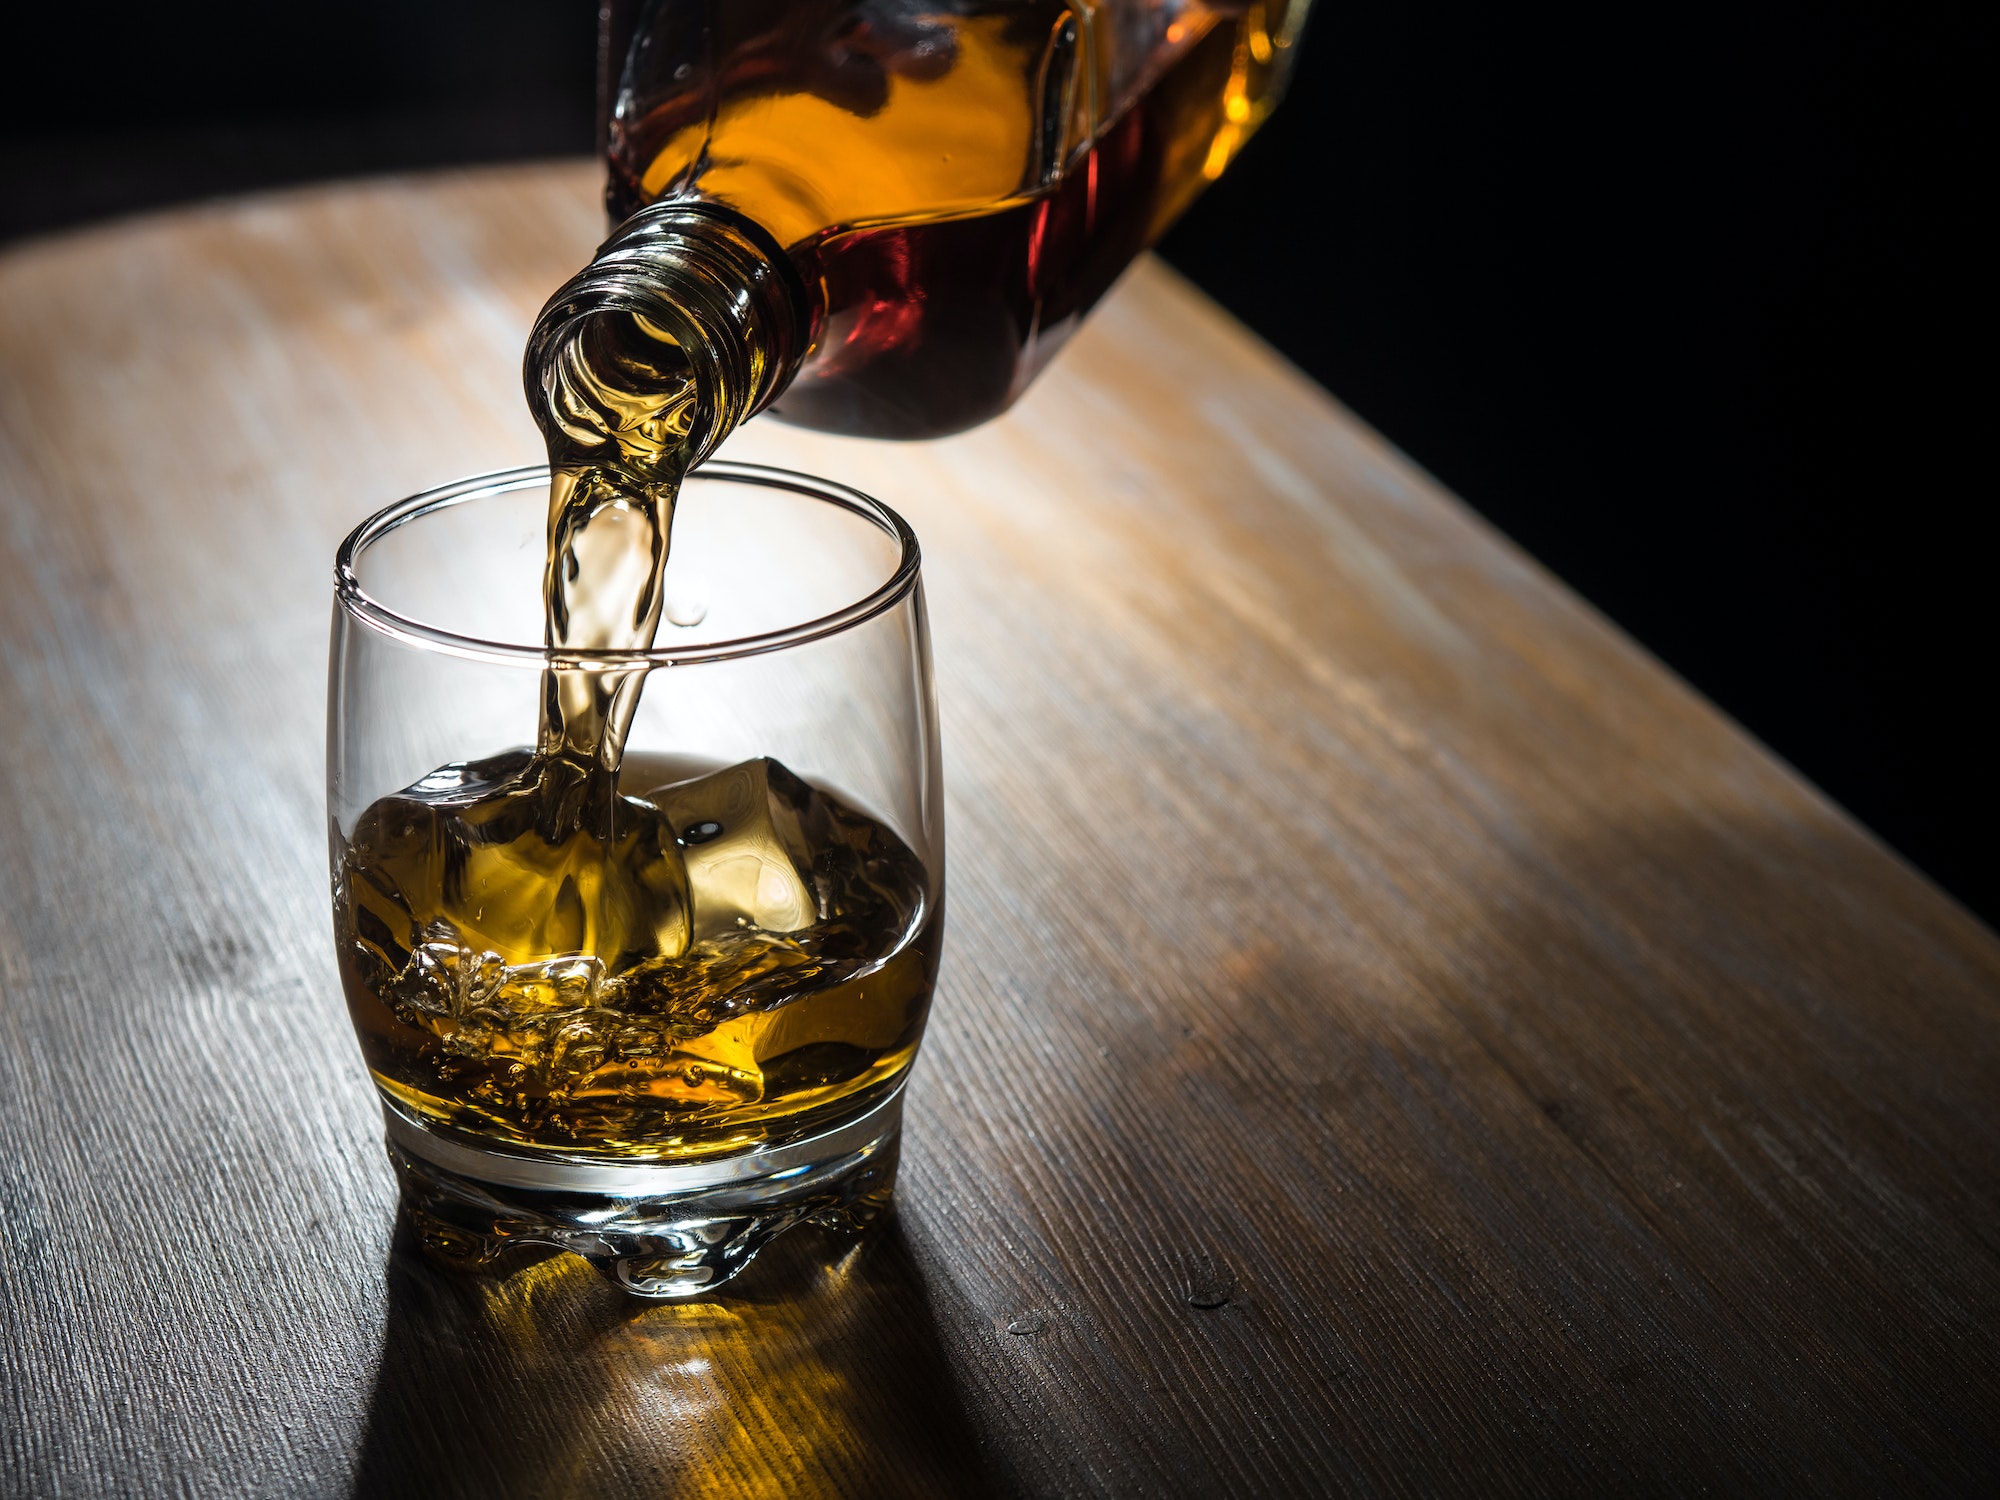 If you're like most whisky lovers, you've probably been curious about the art and history of whisky for some time.